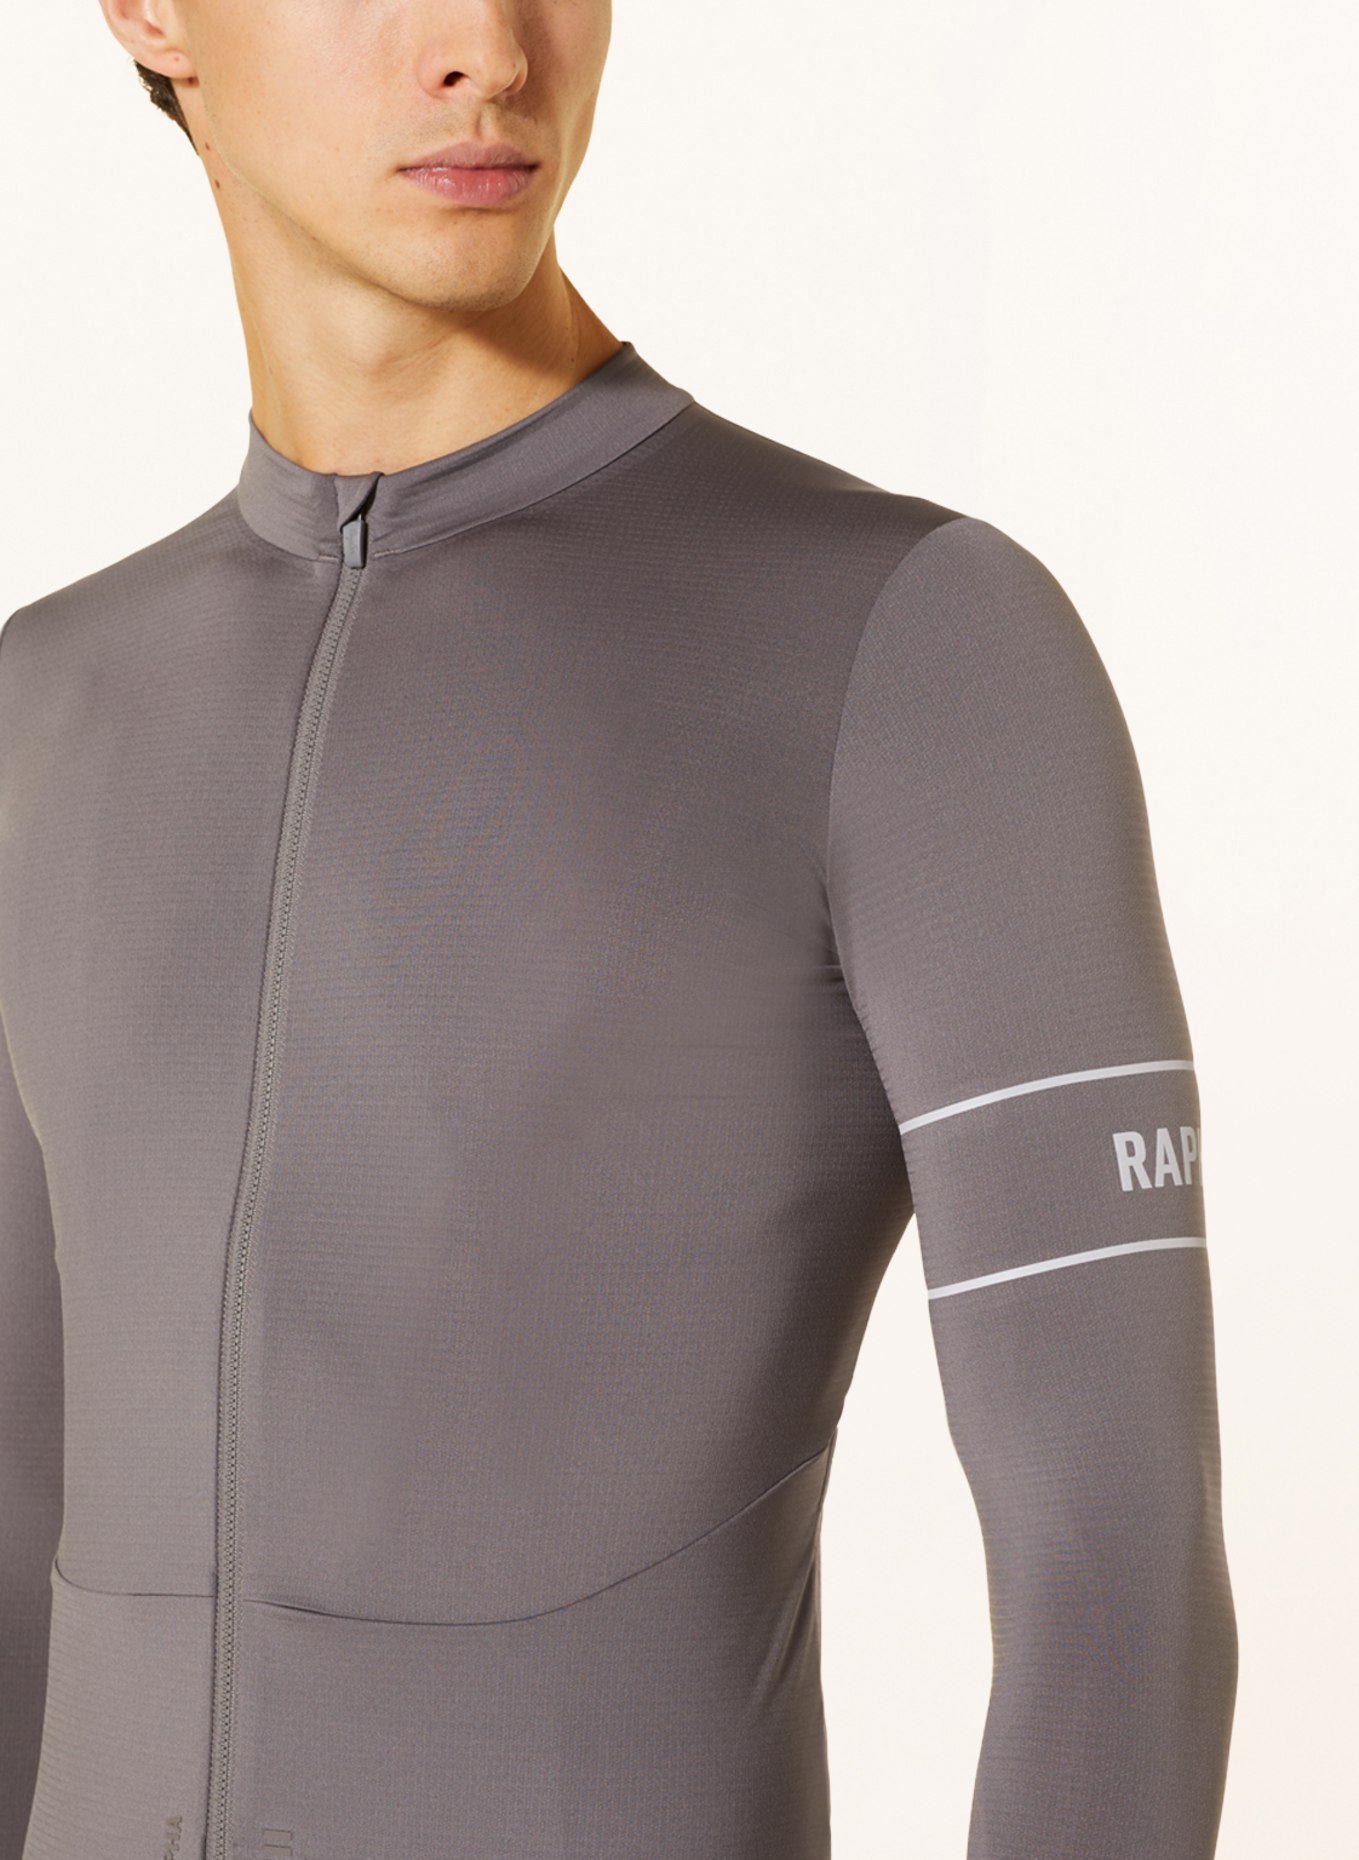 Rapha Thermal cycling jersey PRO TEAM, Color: TAUPE (Image 4)